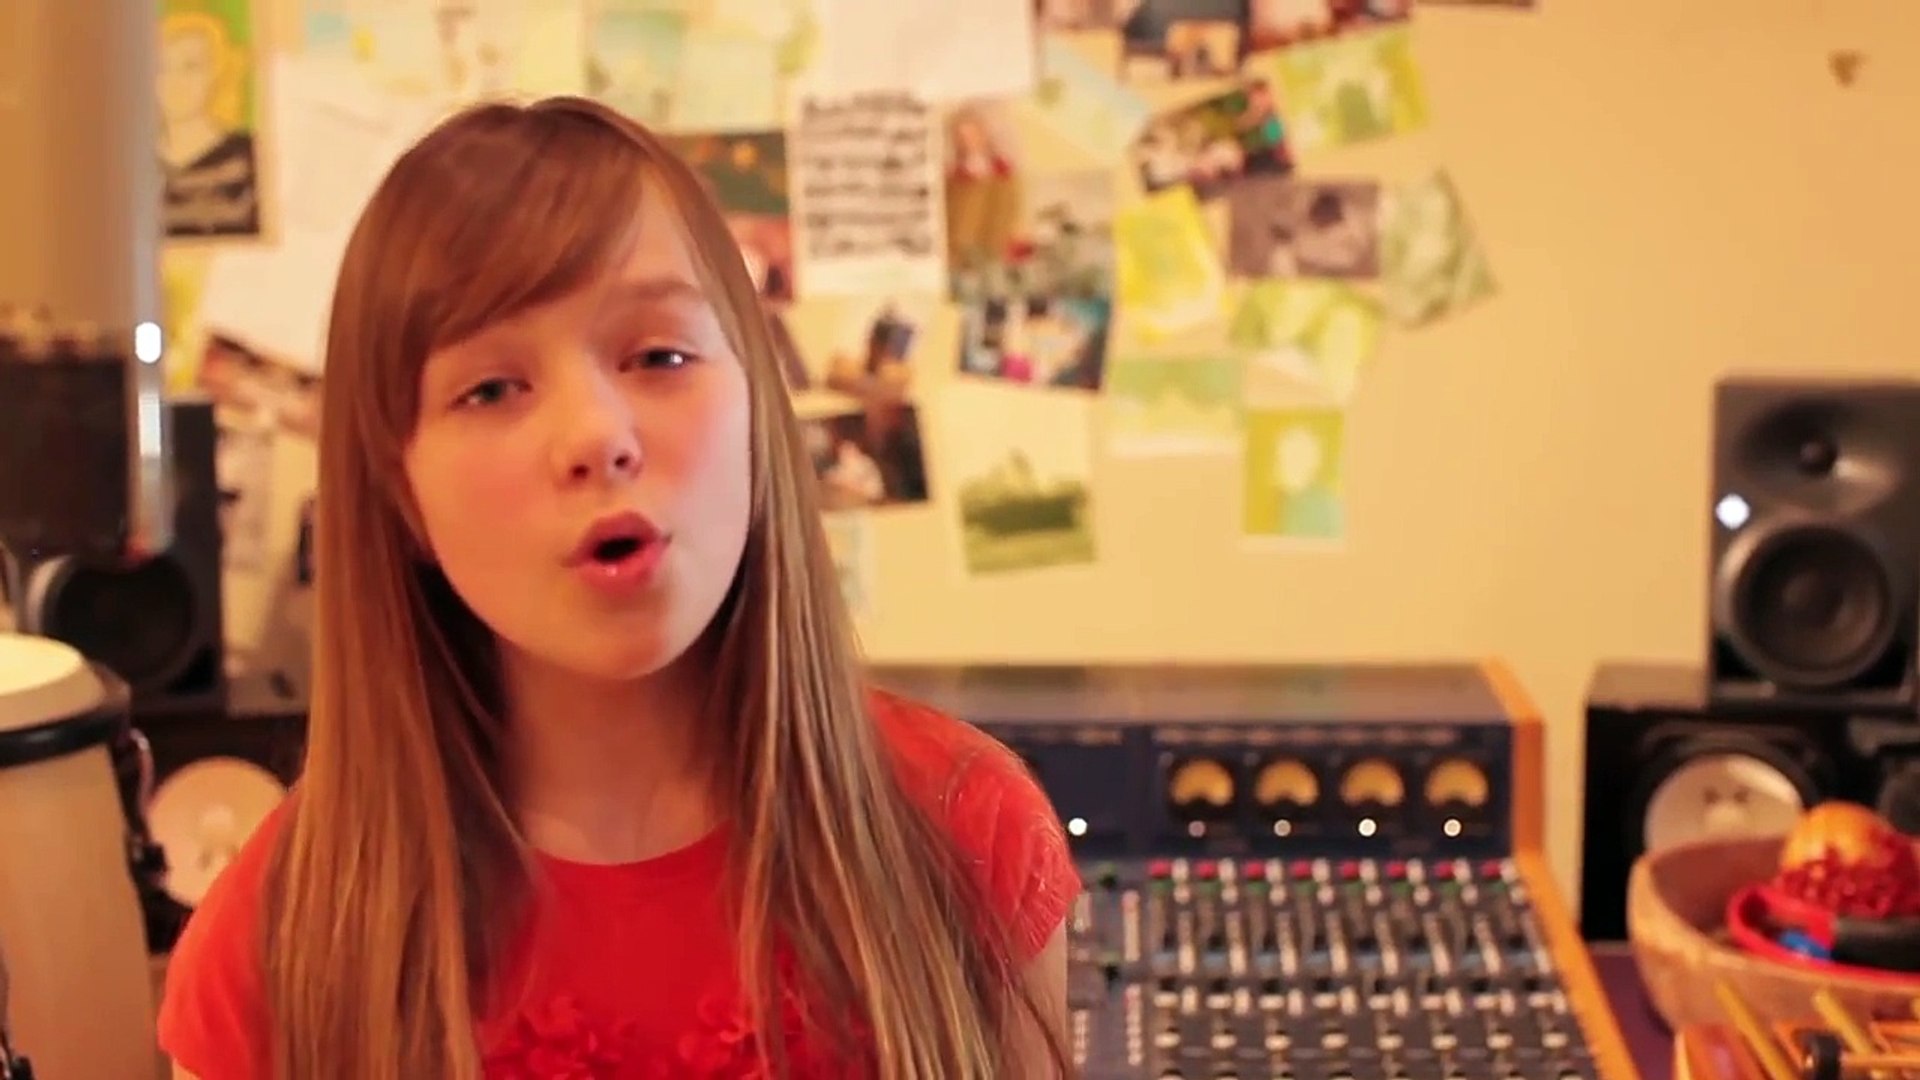 Connie Talbot Count On Me - Connie Talbot Count On Me